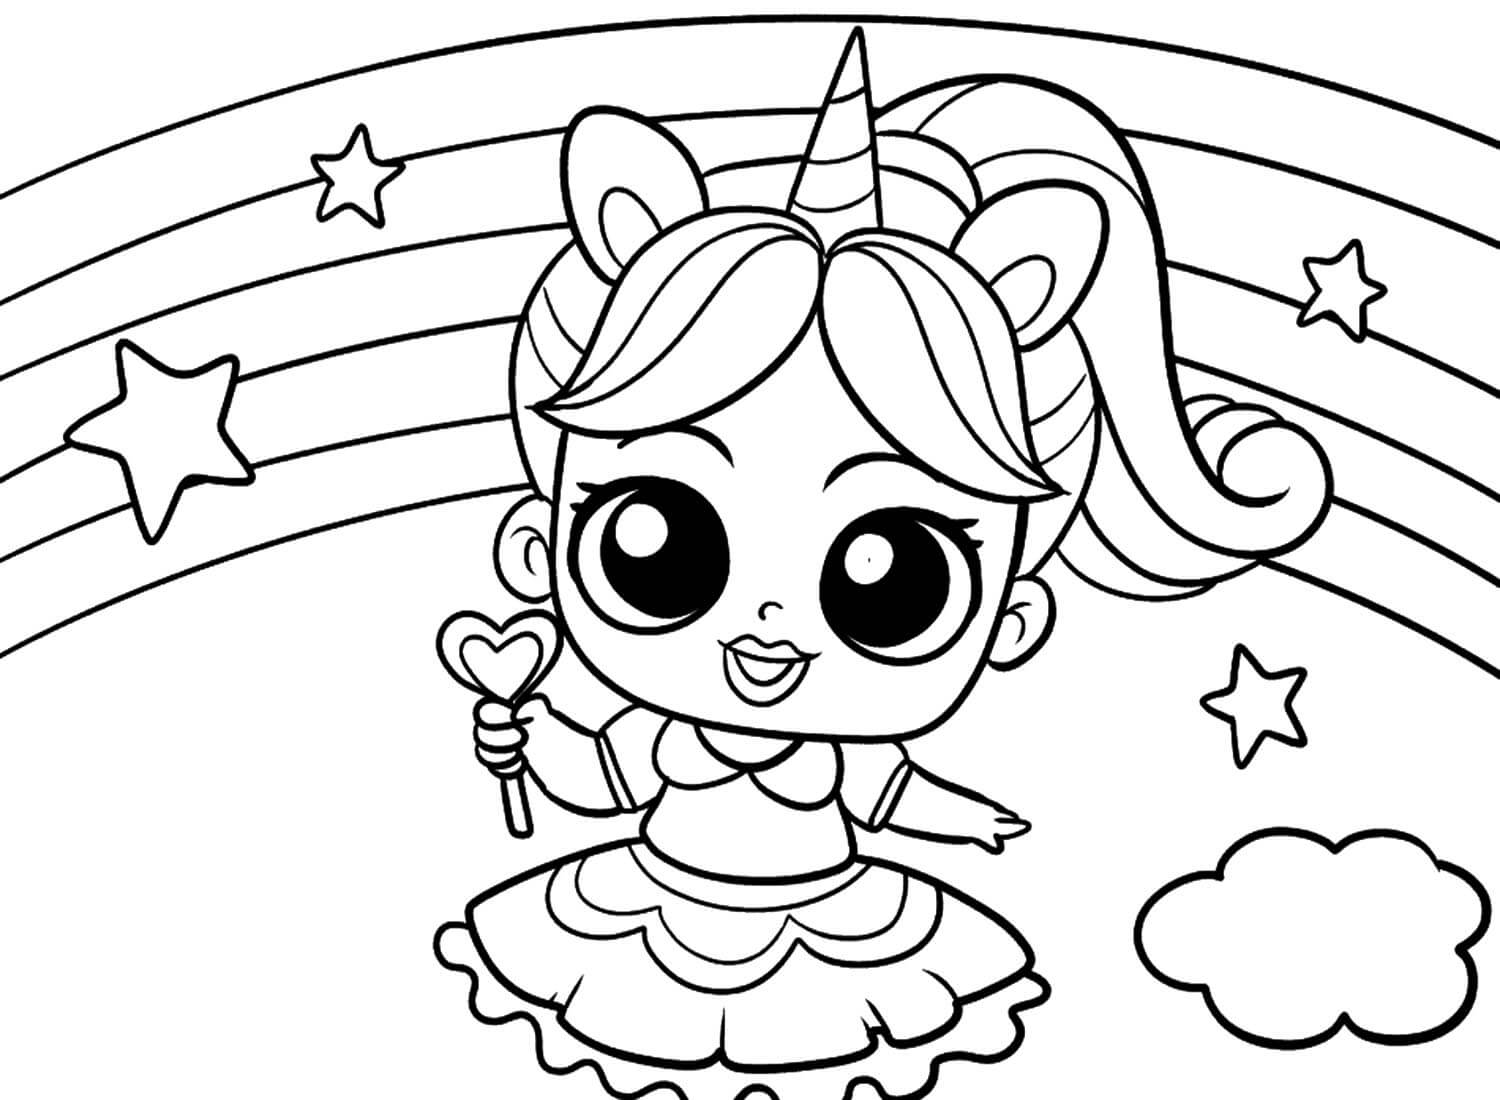 Lol Coloring Sheets from Lol Surprise Doll